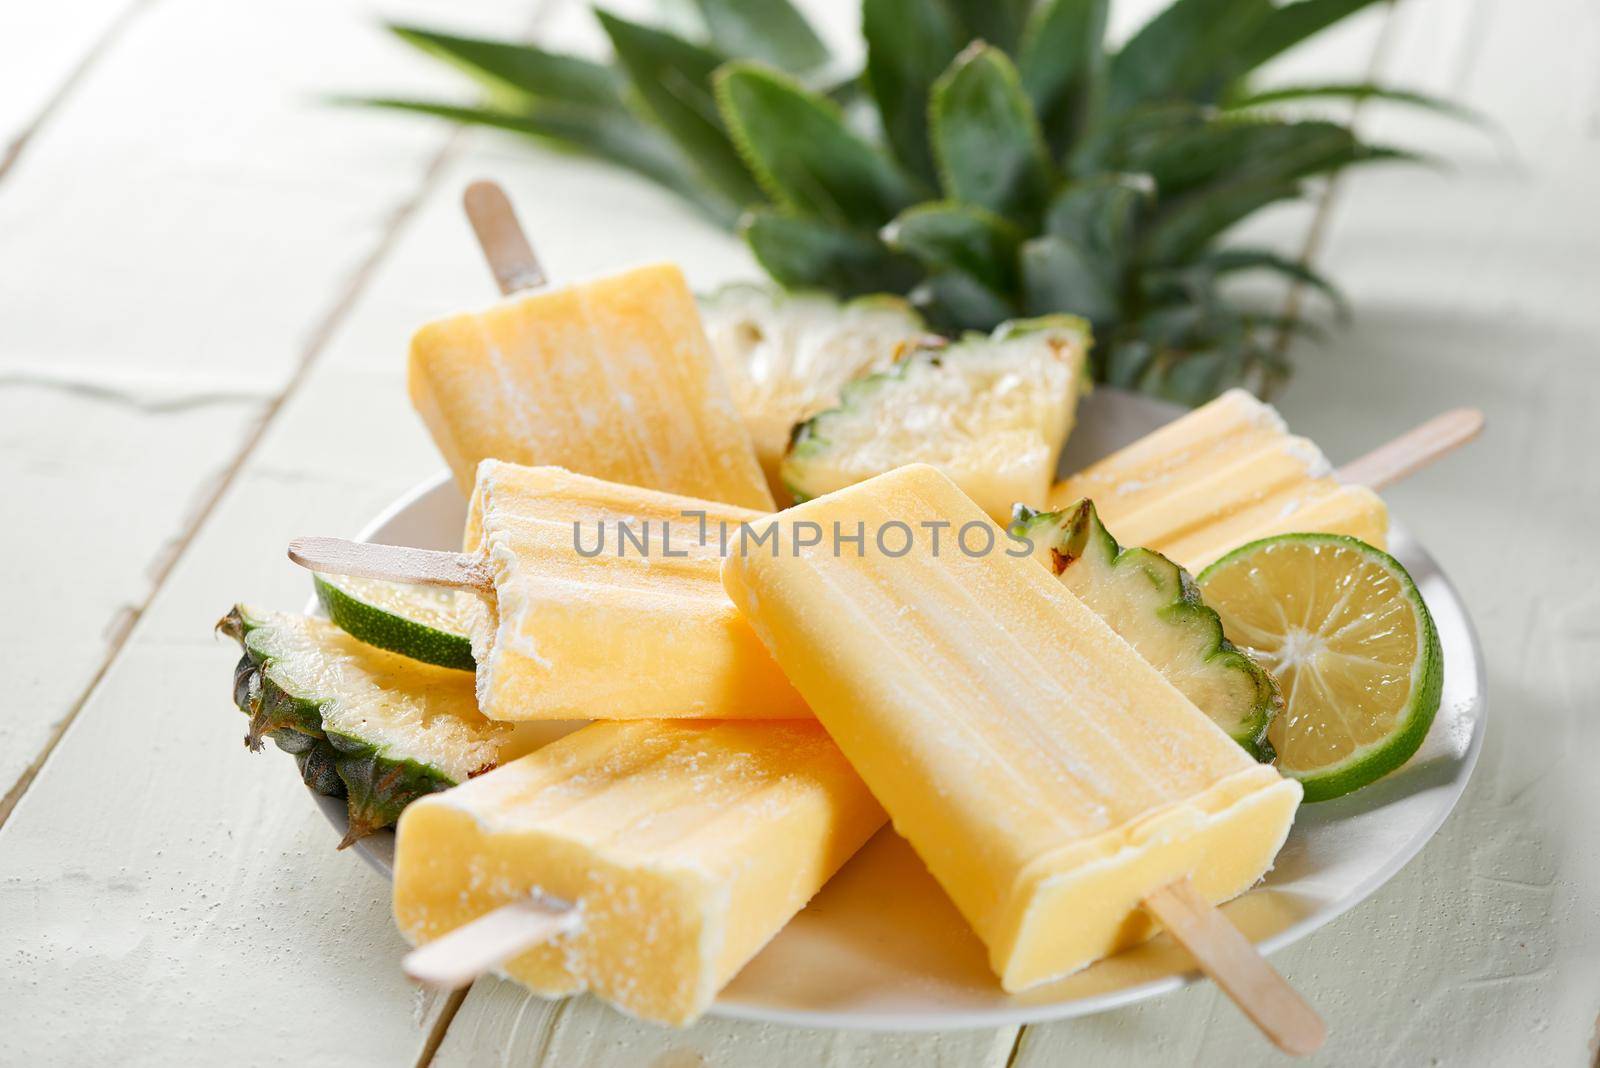 Homemade ice cream or popsicles from pineapple. Frozen fruit pulp. Summer sweets.